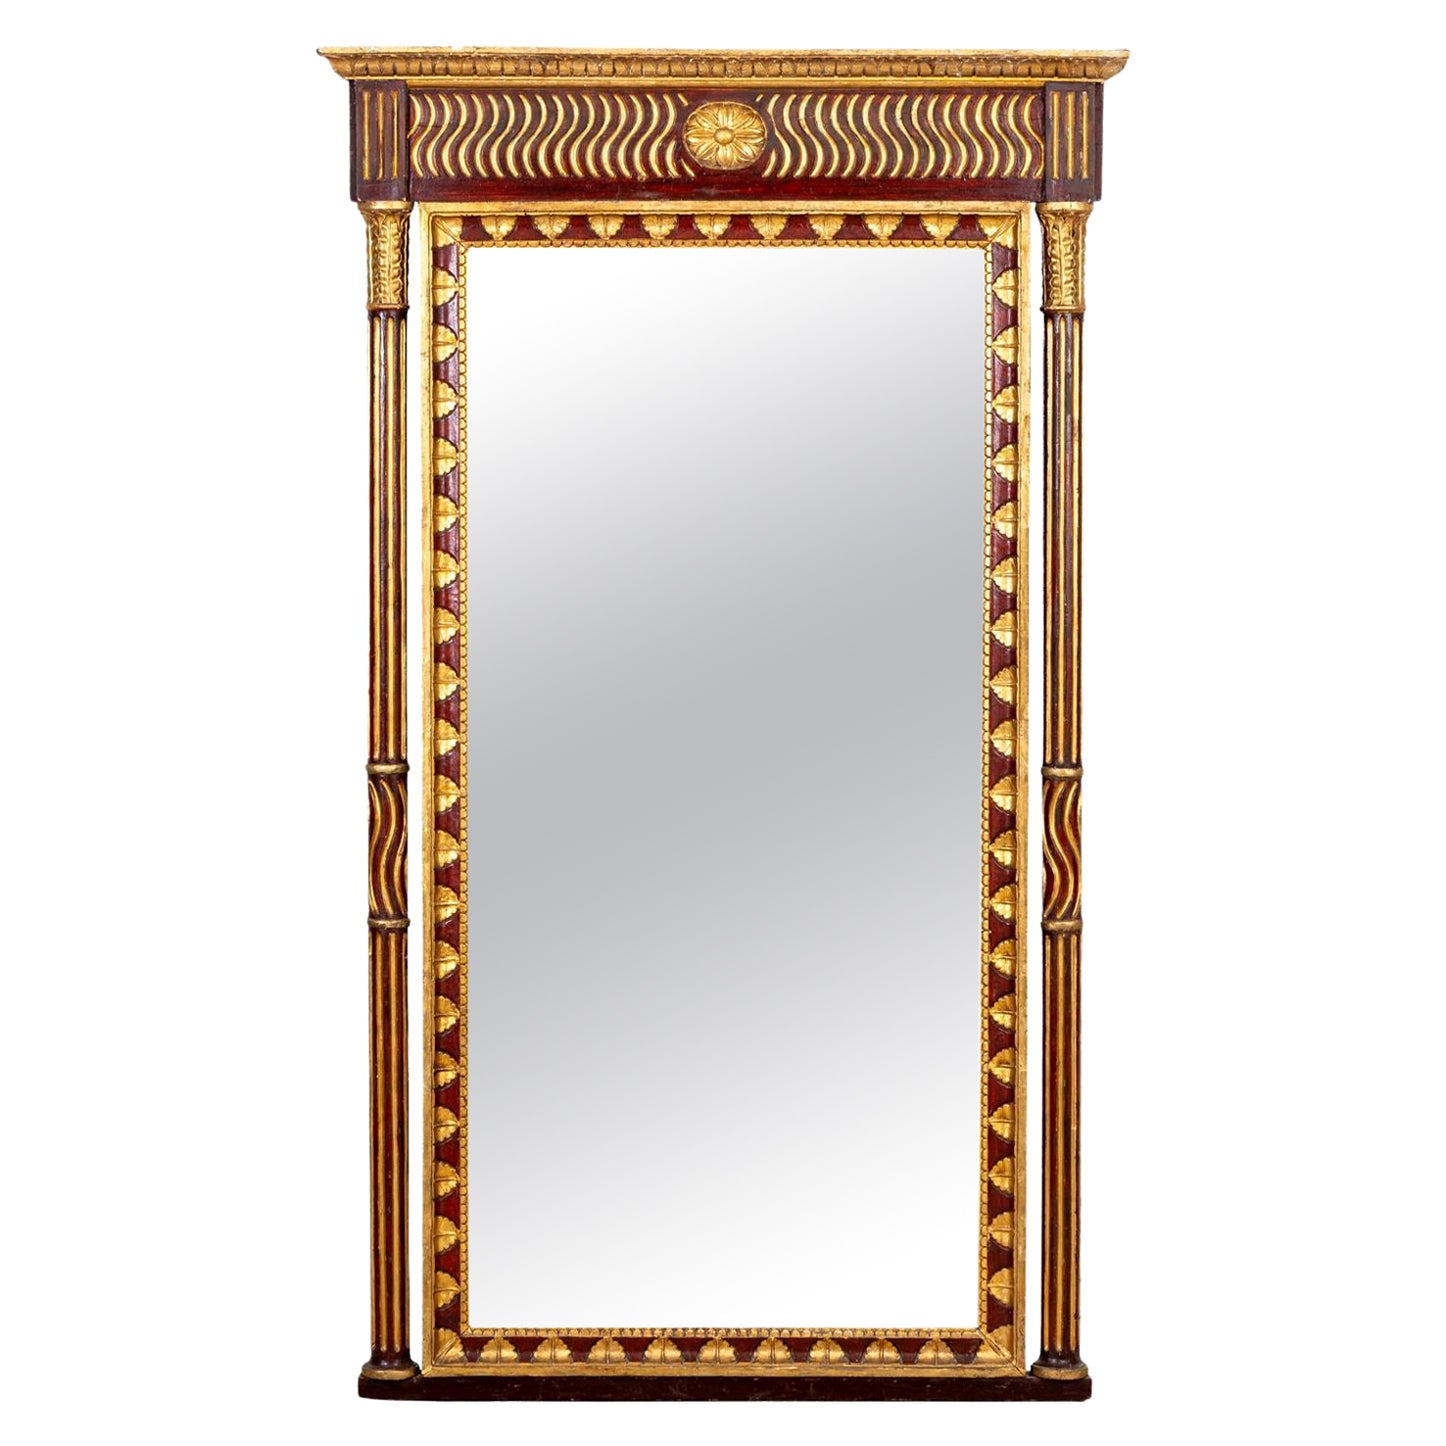 Early 19th Century Painted and Gilt Mirror